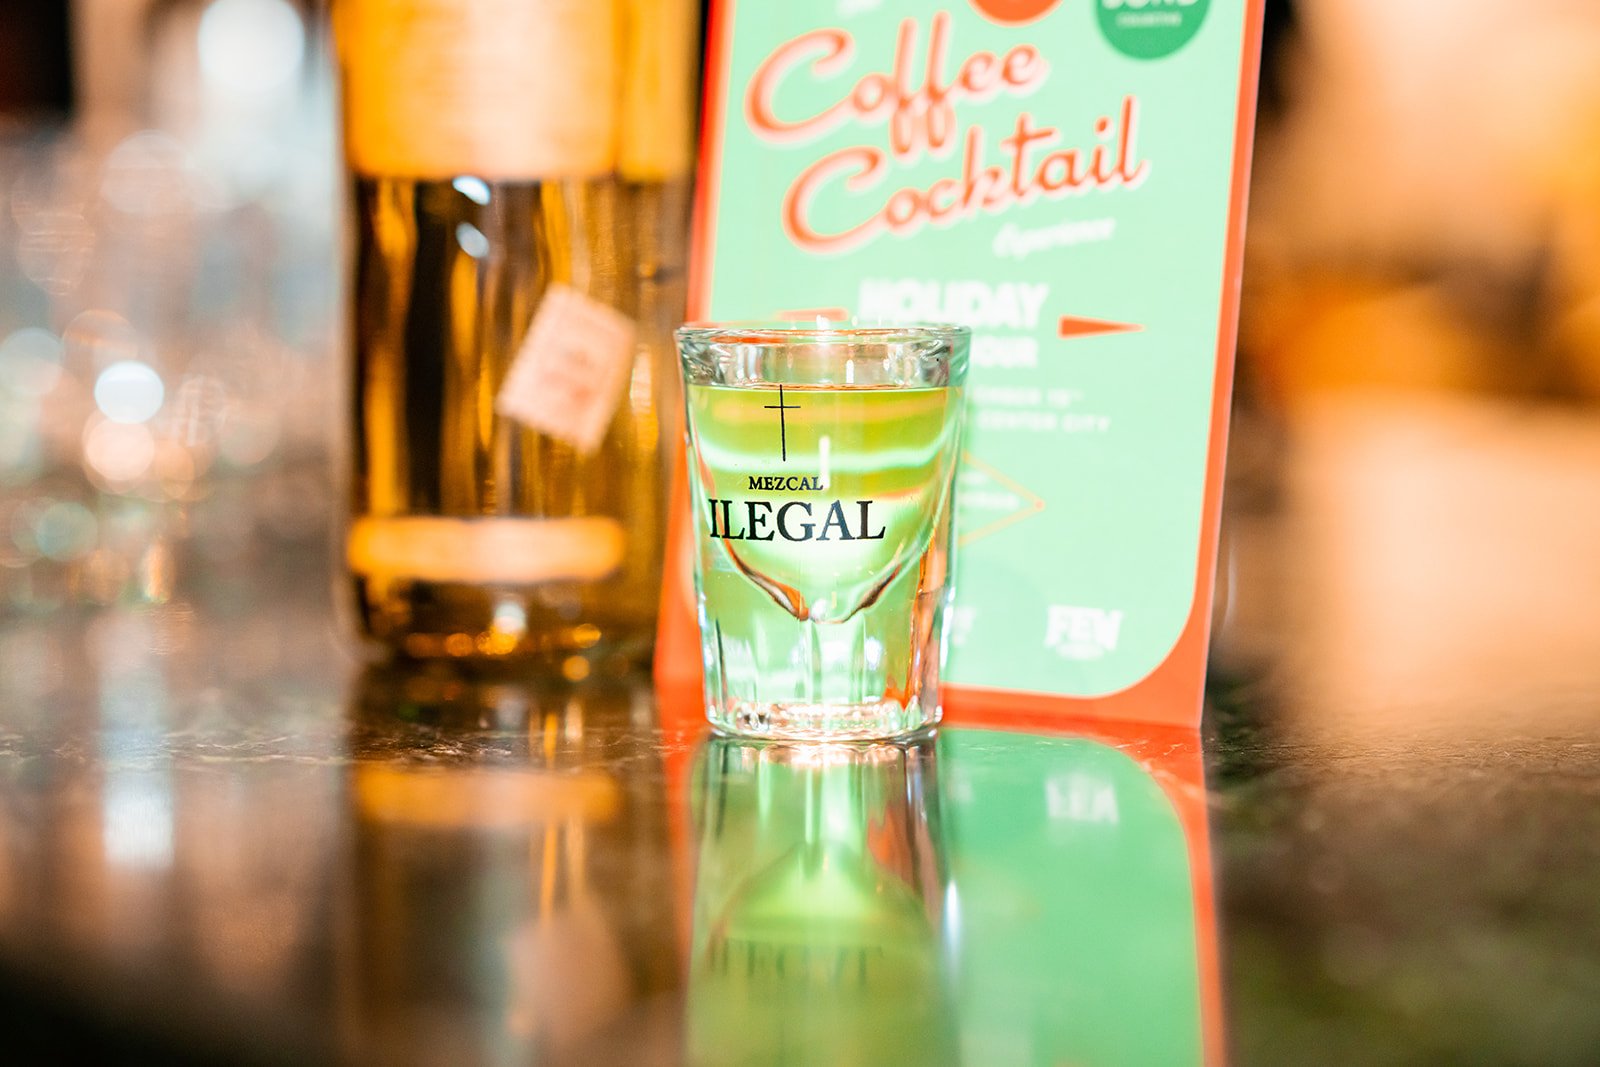 ilegal mezcal and sign at Bond Collective Center City event for Bean2Bean Coffee Co photo by Daniel Knoll